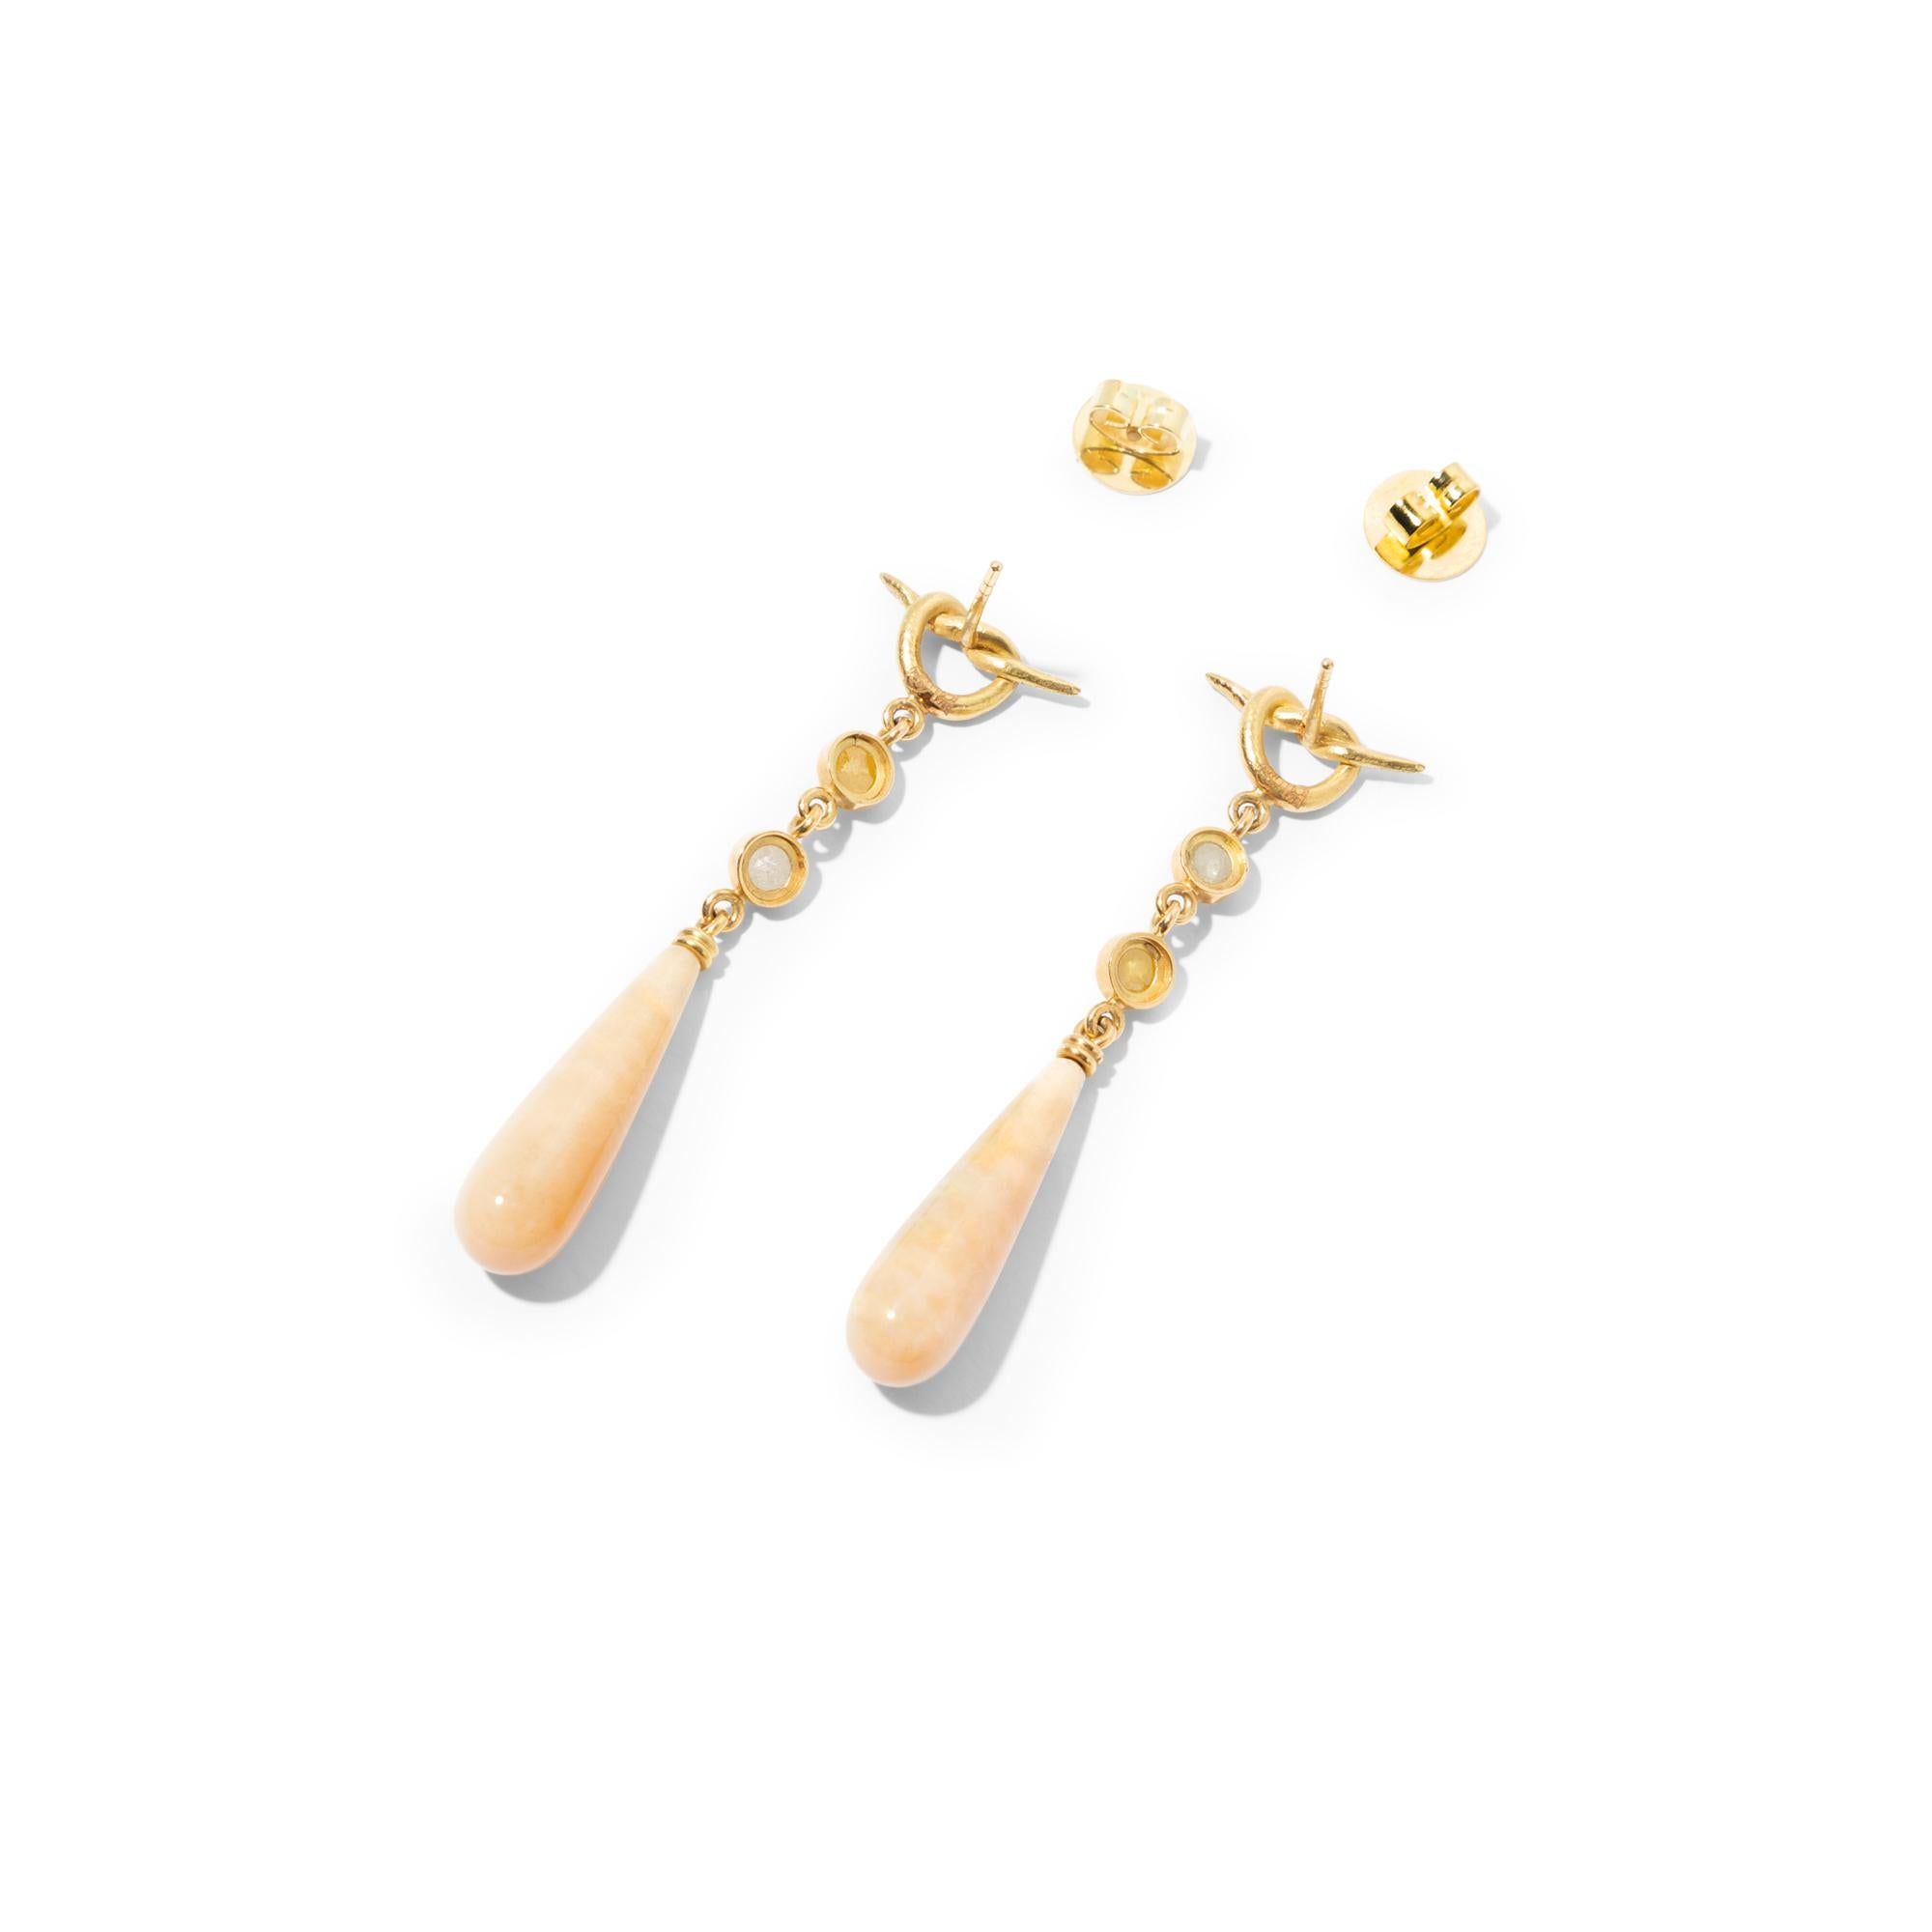 An exquisite pair of 18k gold earrings featuring long honey opal drops of exceptional beauty and light grey and yellow rose cut diamonds in an asymmetric colour combination which amplifies the opals' natural splendour. The gemstones are suspended